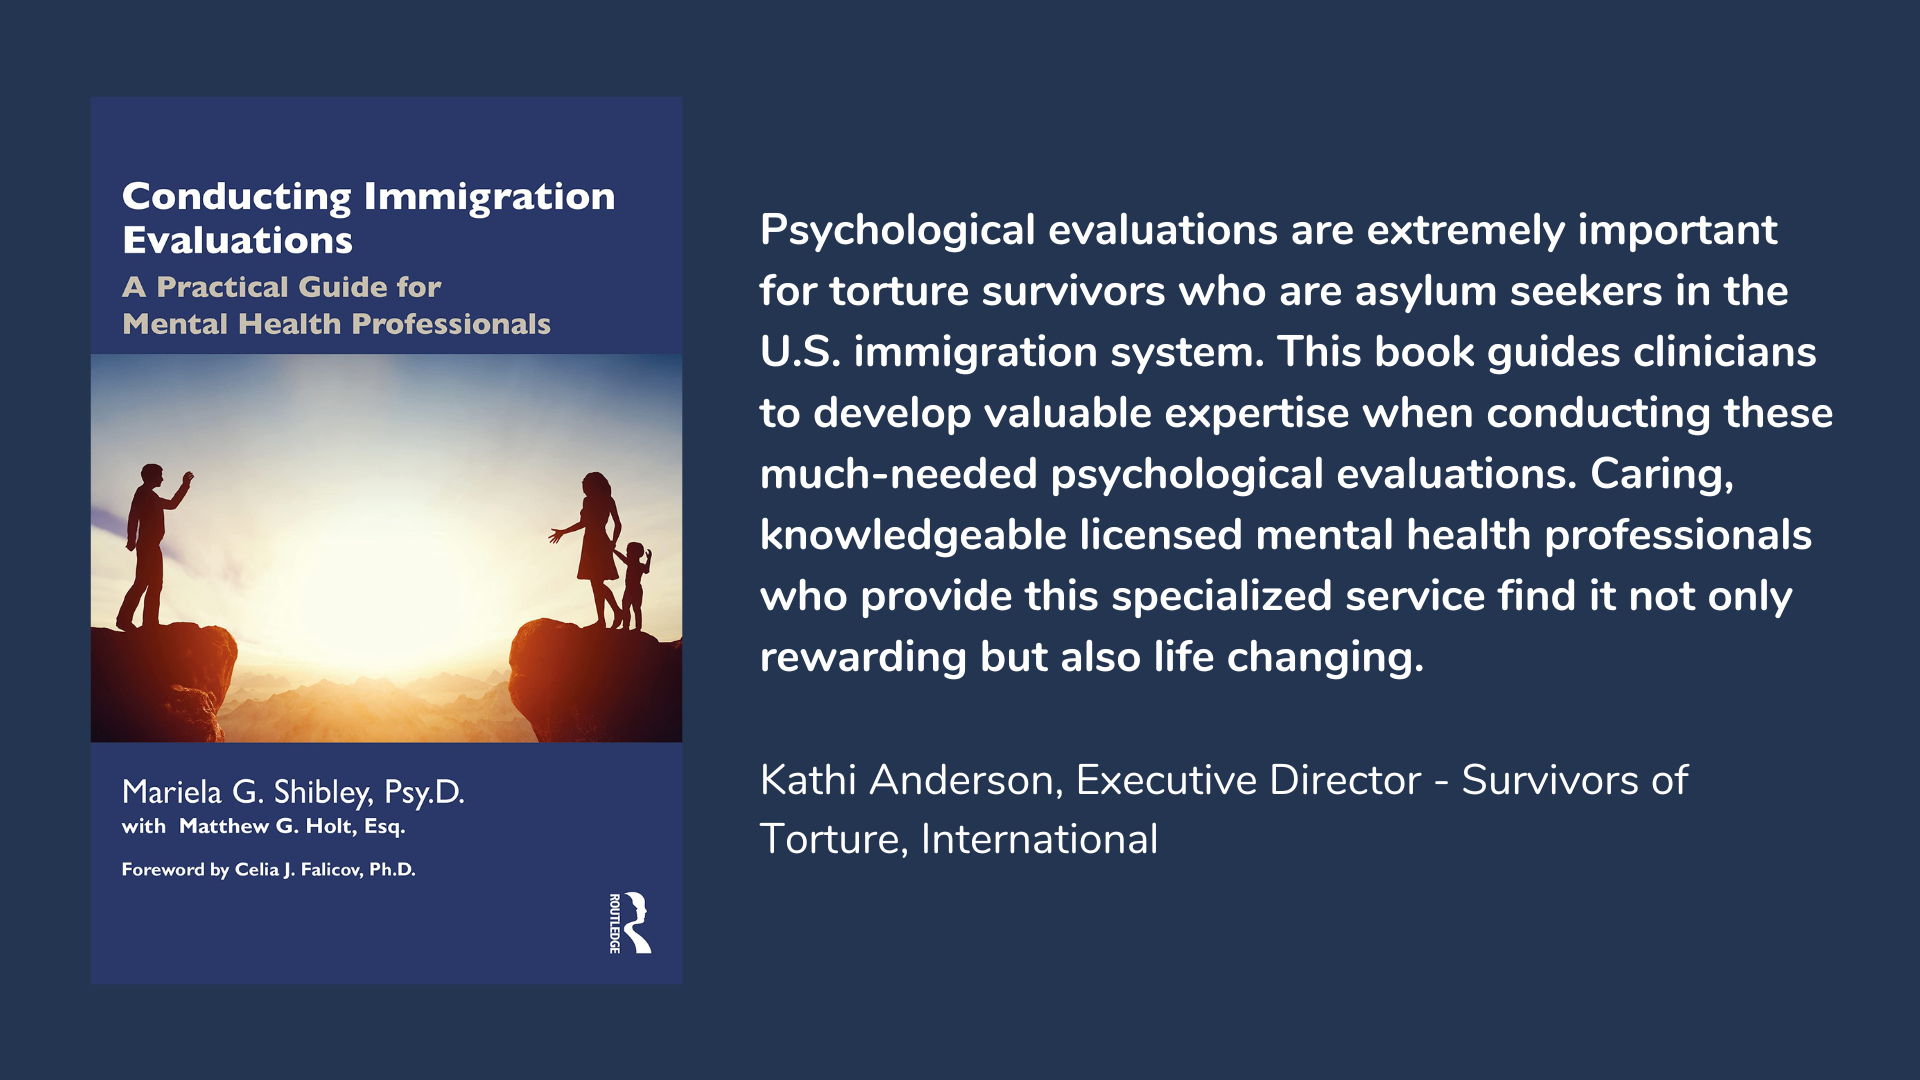 Conducting Immigration Evaluations: A Practical Guide for Mental Health Professionals, book cover and description